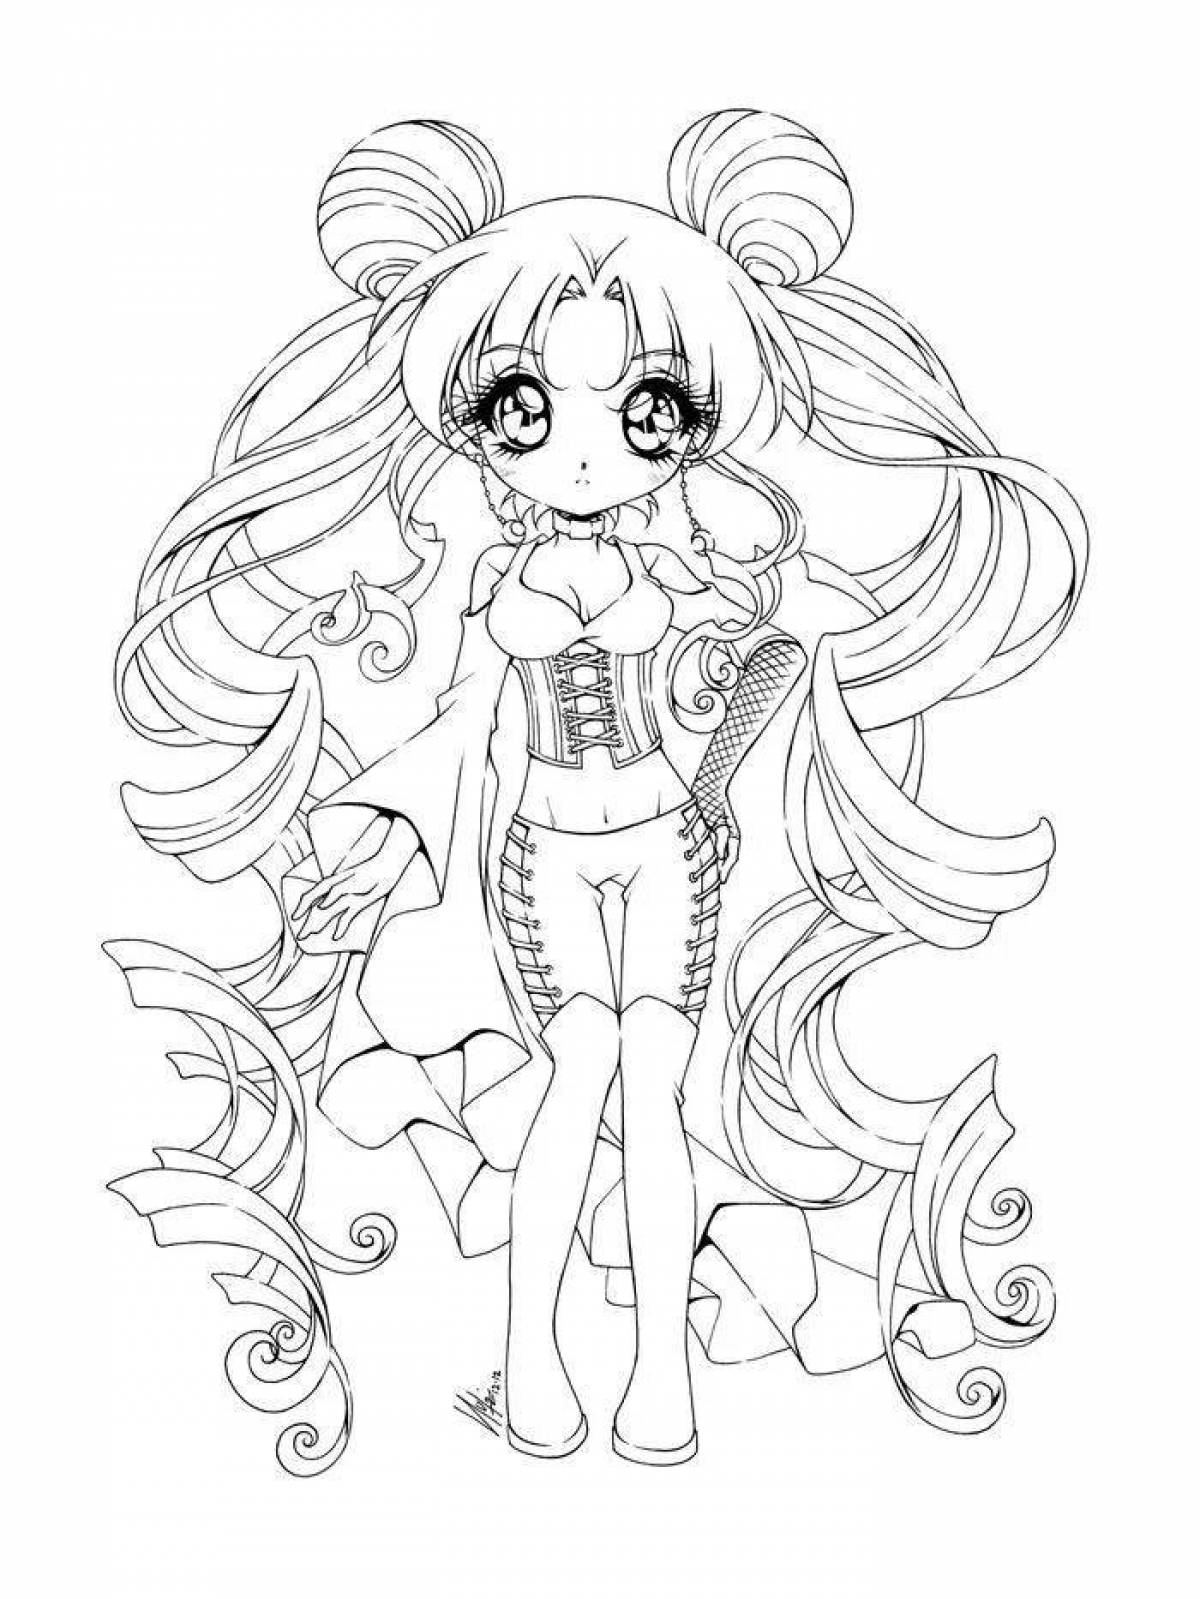 Awesome anime cute coloring pages